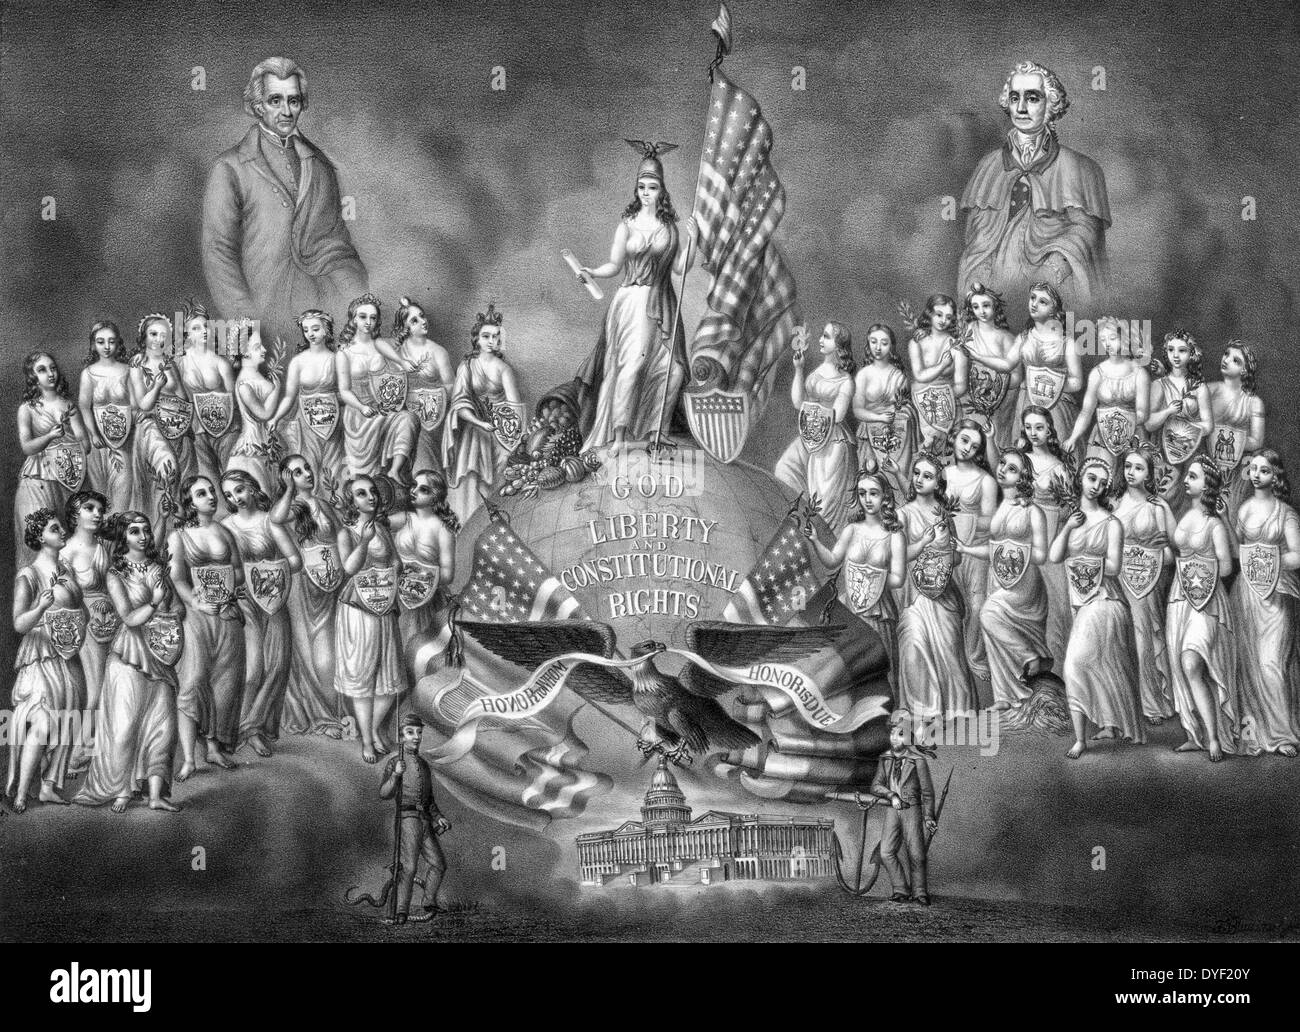 The Reunion of the Home of the Brave and the Free an illustration showing portraits of President George Washington and President Andrew Jackson looking over the ideals of liberty personified as women. Lady Liberty stands atop the globe holding a scroll and a flowing US flag. Next to her lies a cornucopia spilling out fruits of all types. Circa 1800's. Stock Photo